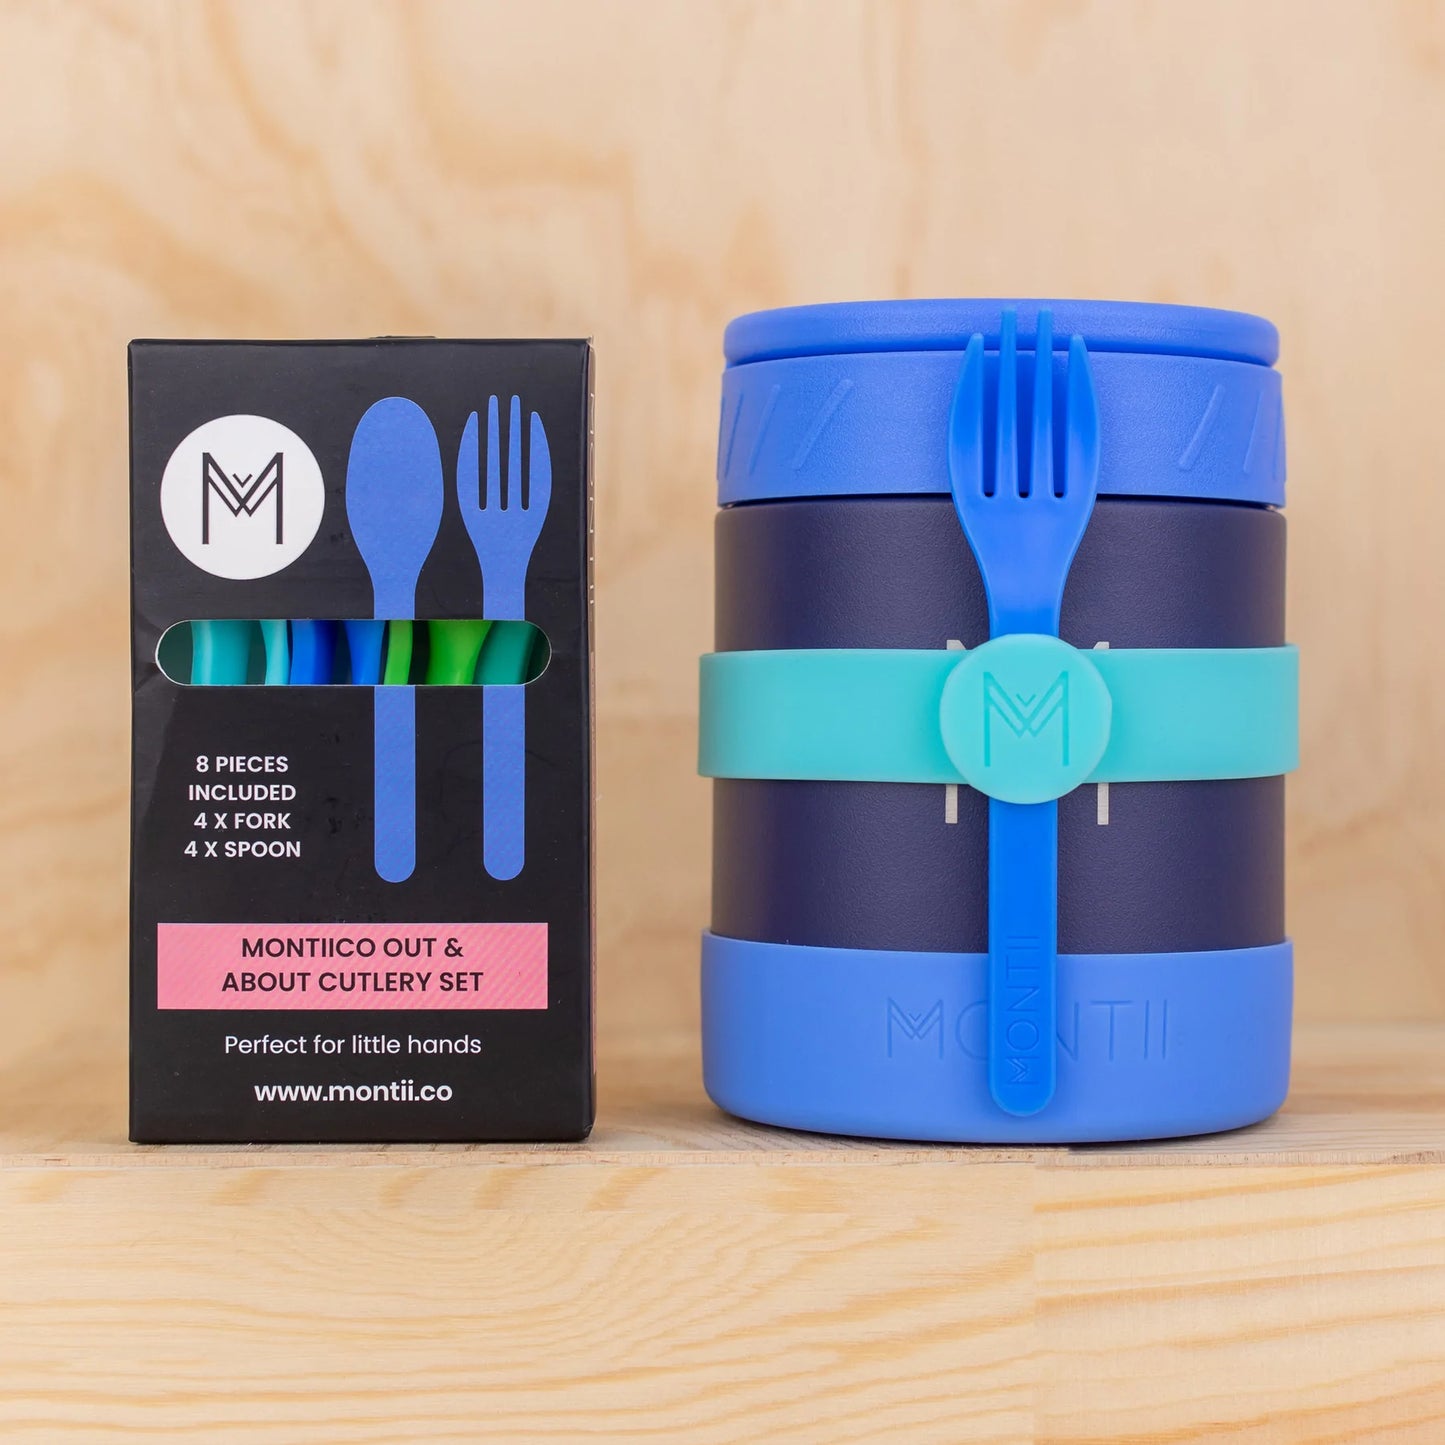 MONTIICO OUT & ABOUT CUTLERY SET - BLUEBERRY